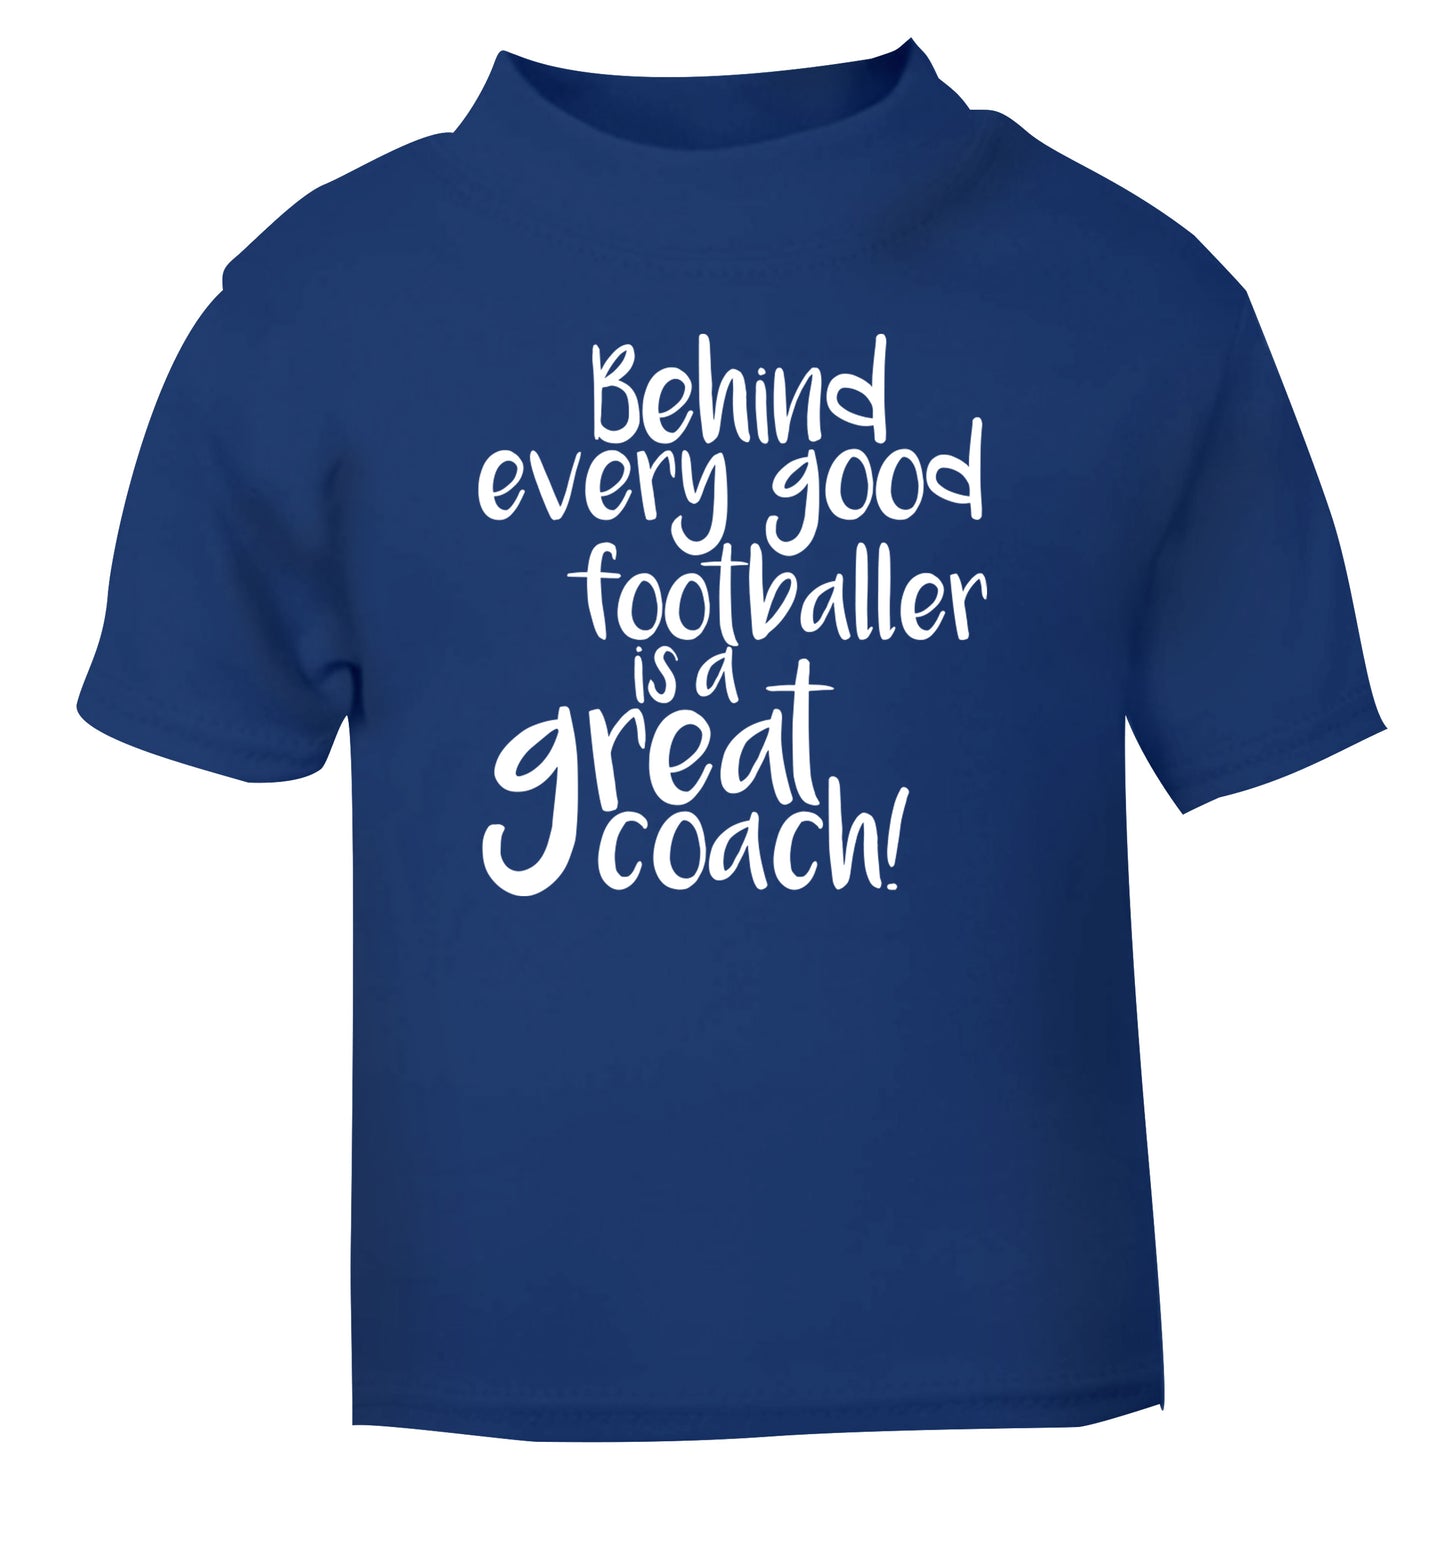 Behind every good footballer is a great coach! blue Baby Toddler Tshirt 2 Years